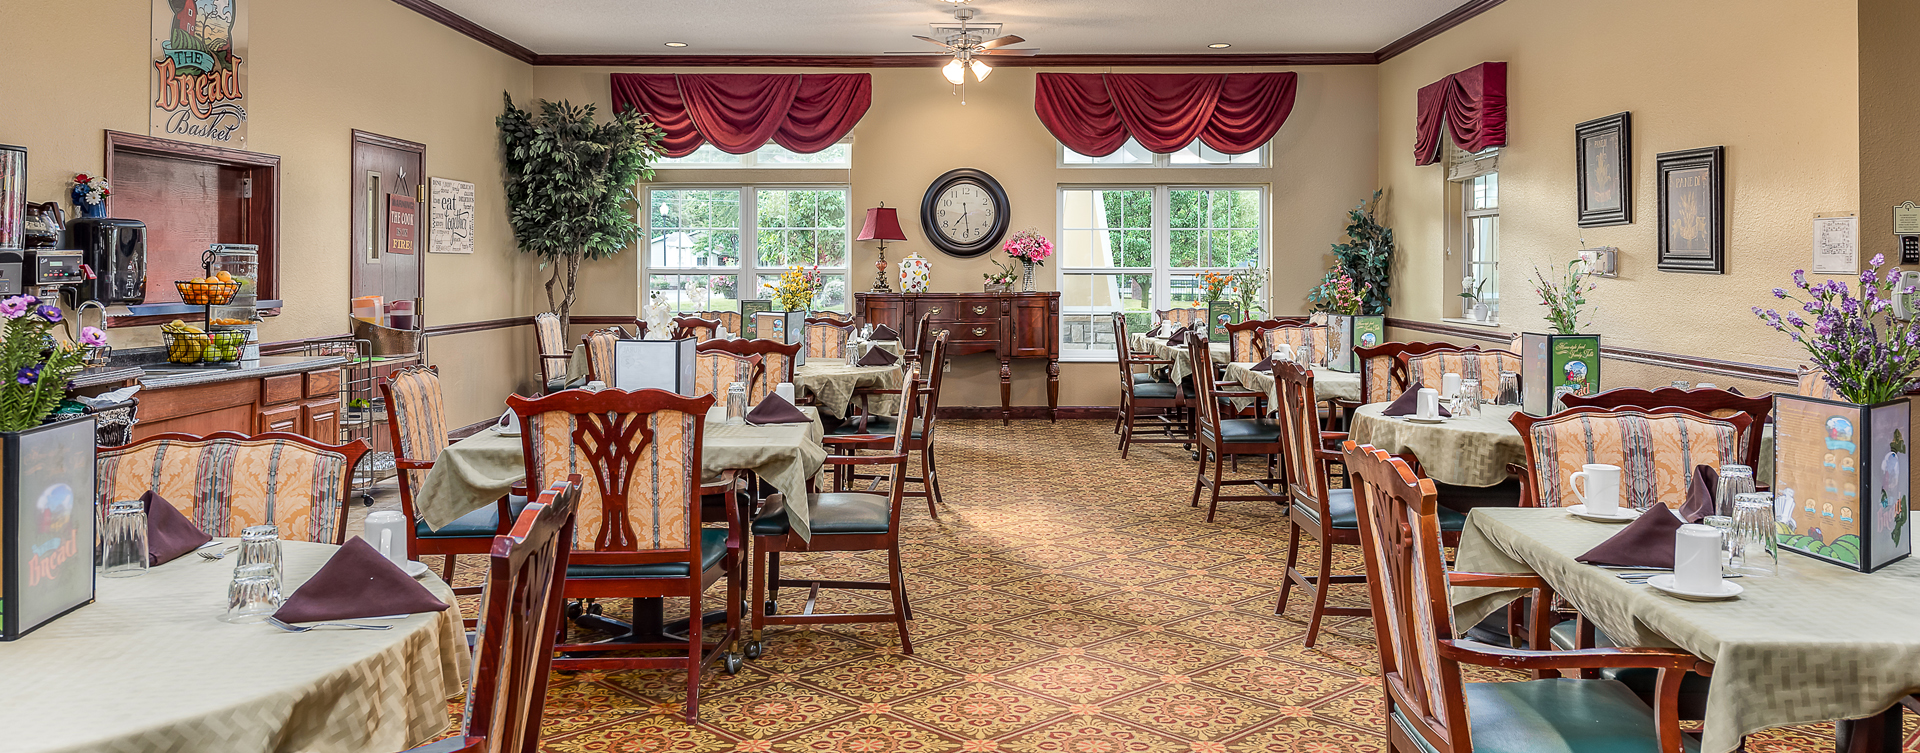 Food is best when shared with friends in the dining room at Bickford of Saginaw Township